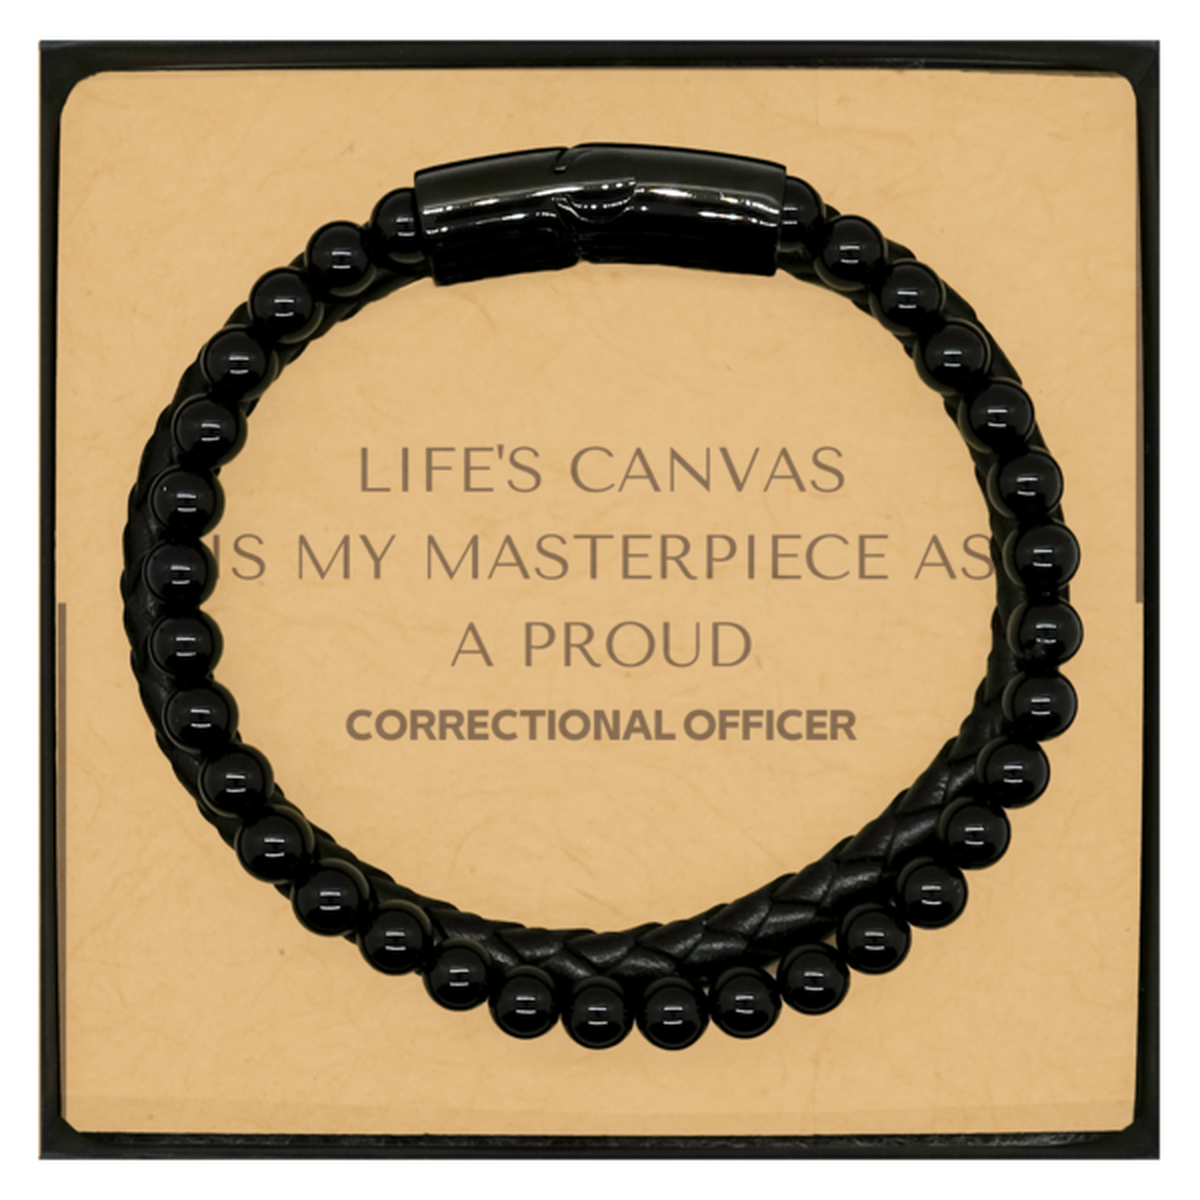 Proud Correctional Officer Gifts, Life's canvas is my masterpiece, Epic Birthday Christmas Unique Stone Leather Bracelets For Correctional Officer, Coworkers, Men, Women, Friends